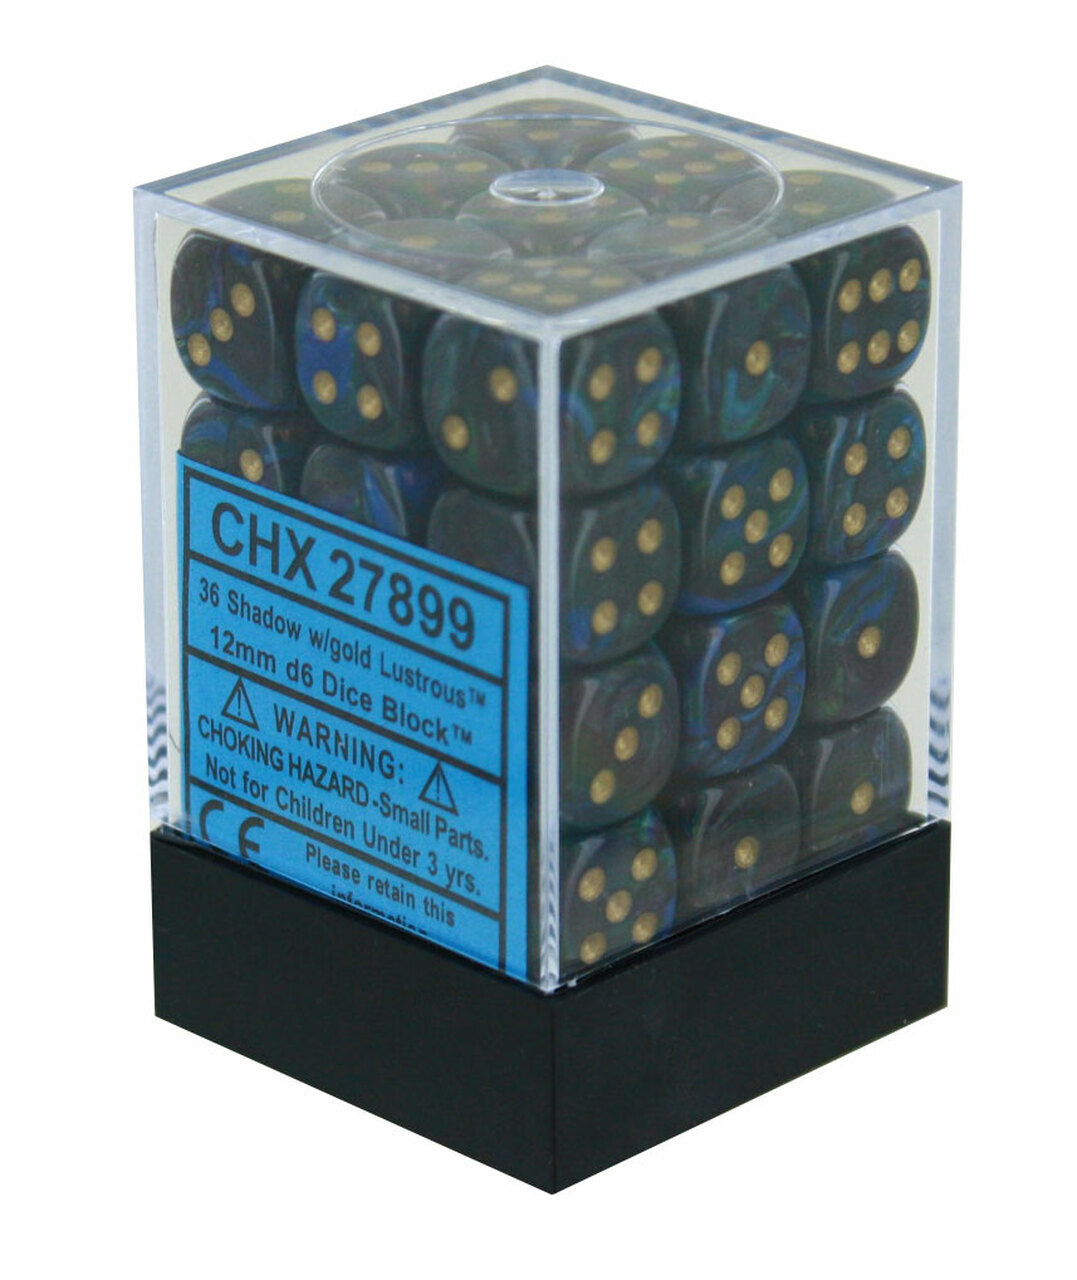 Dice Cube 36d6 Lustrous Shadow with Gold